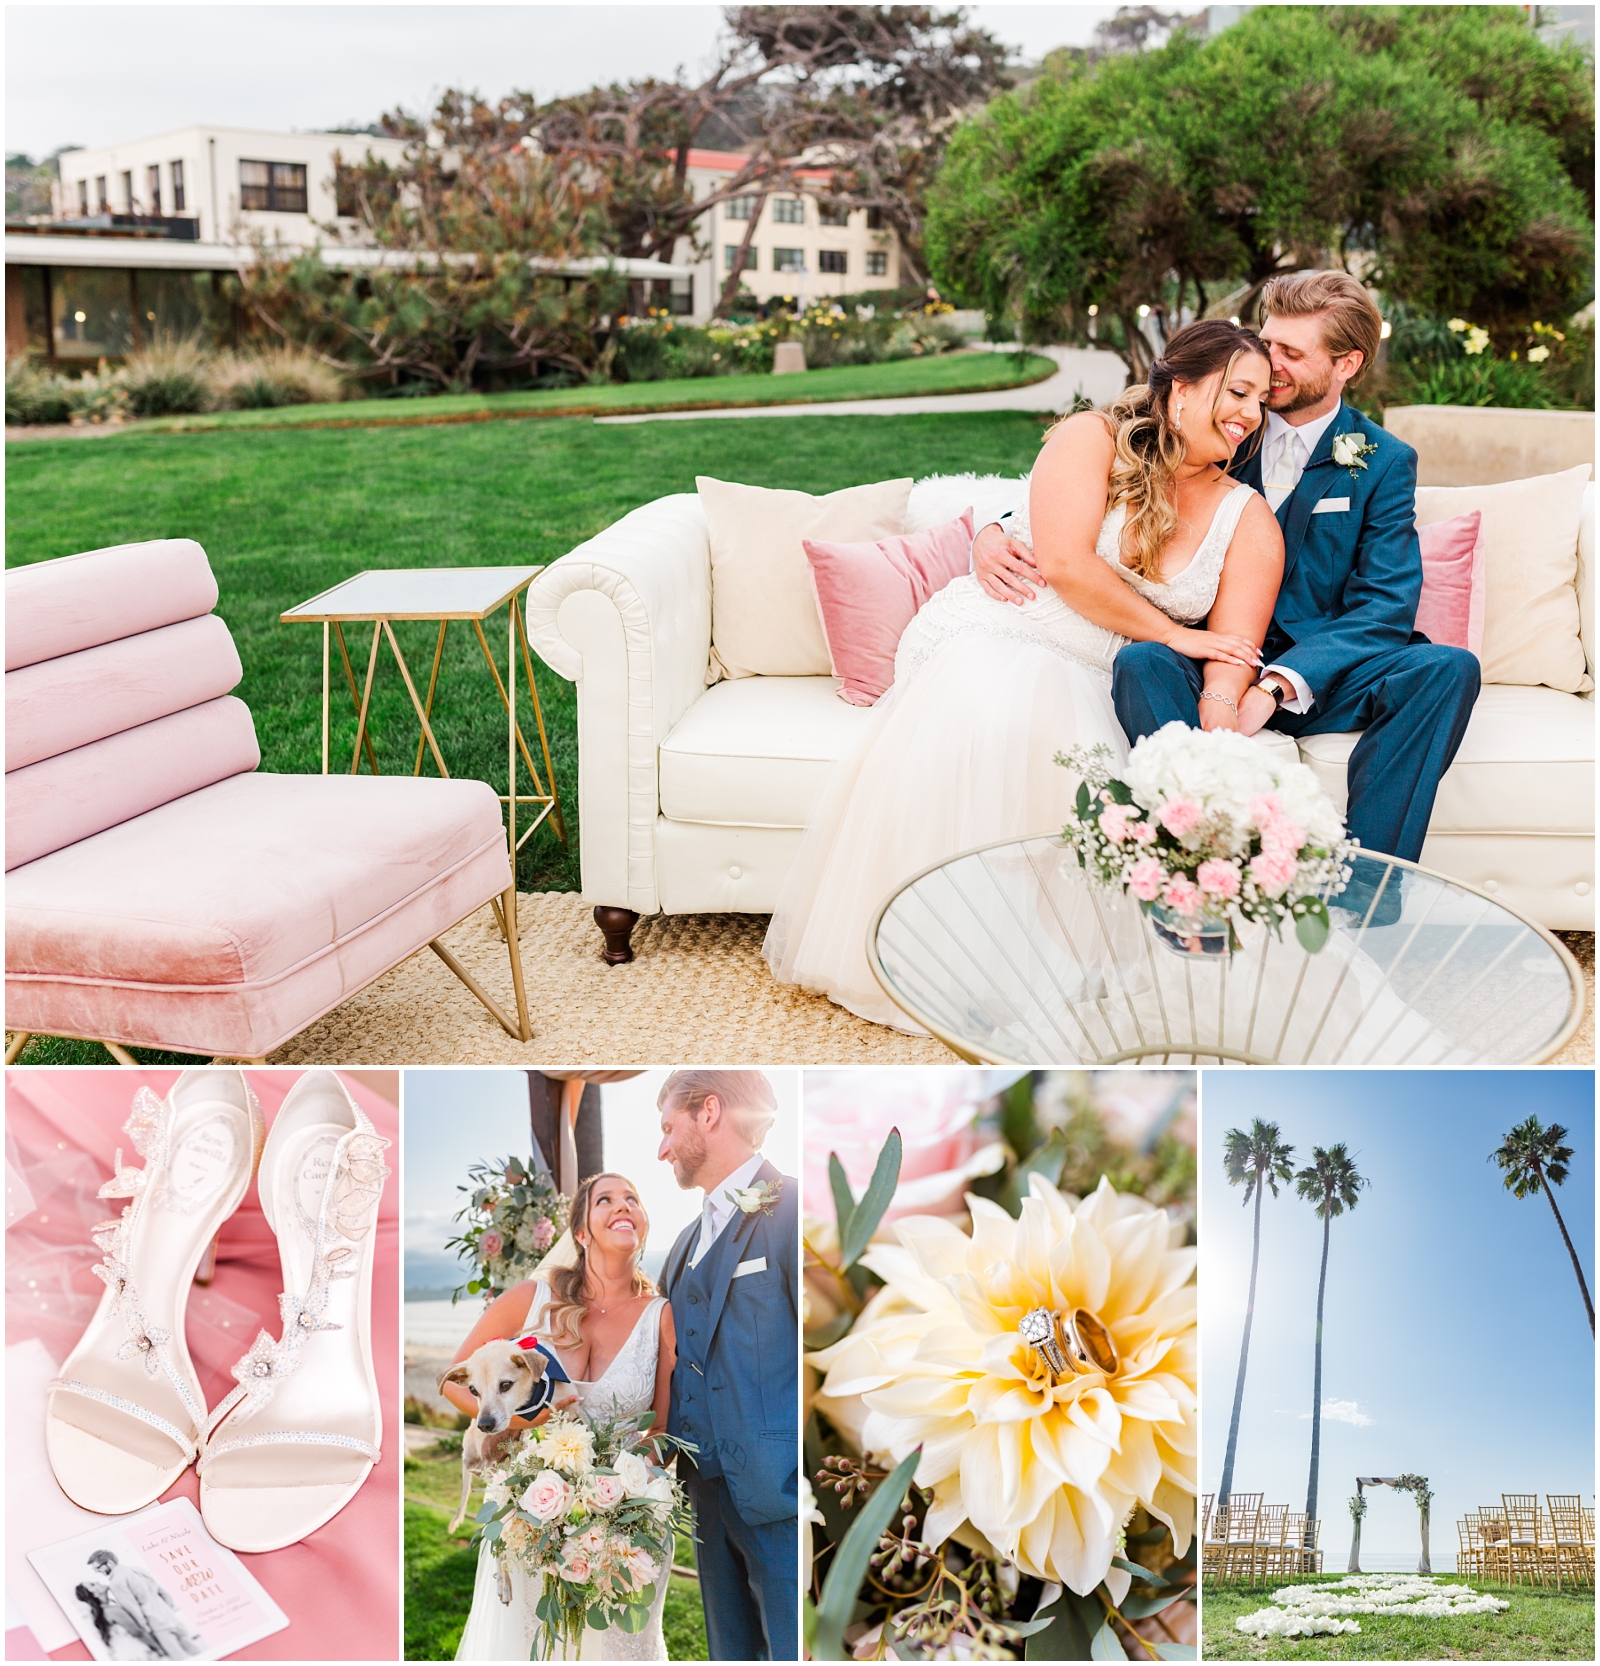 Collage of photos of bride and groom at California wedding